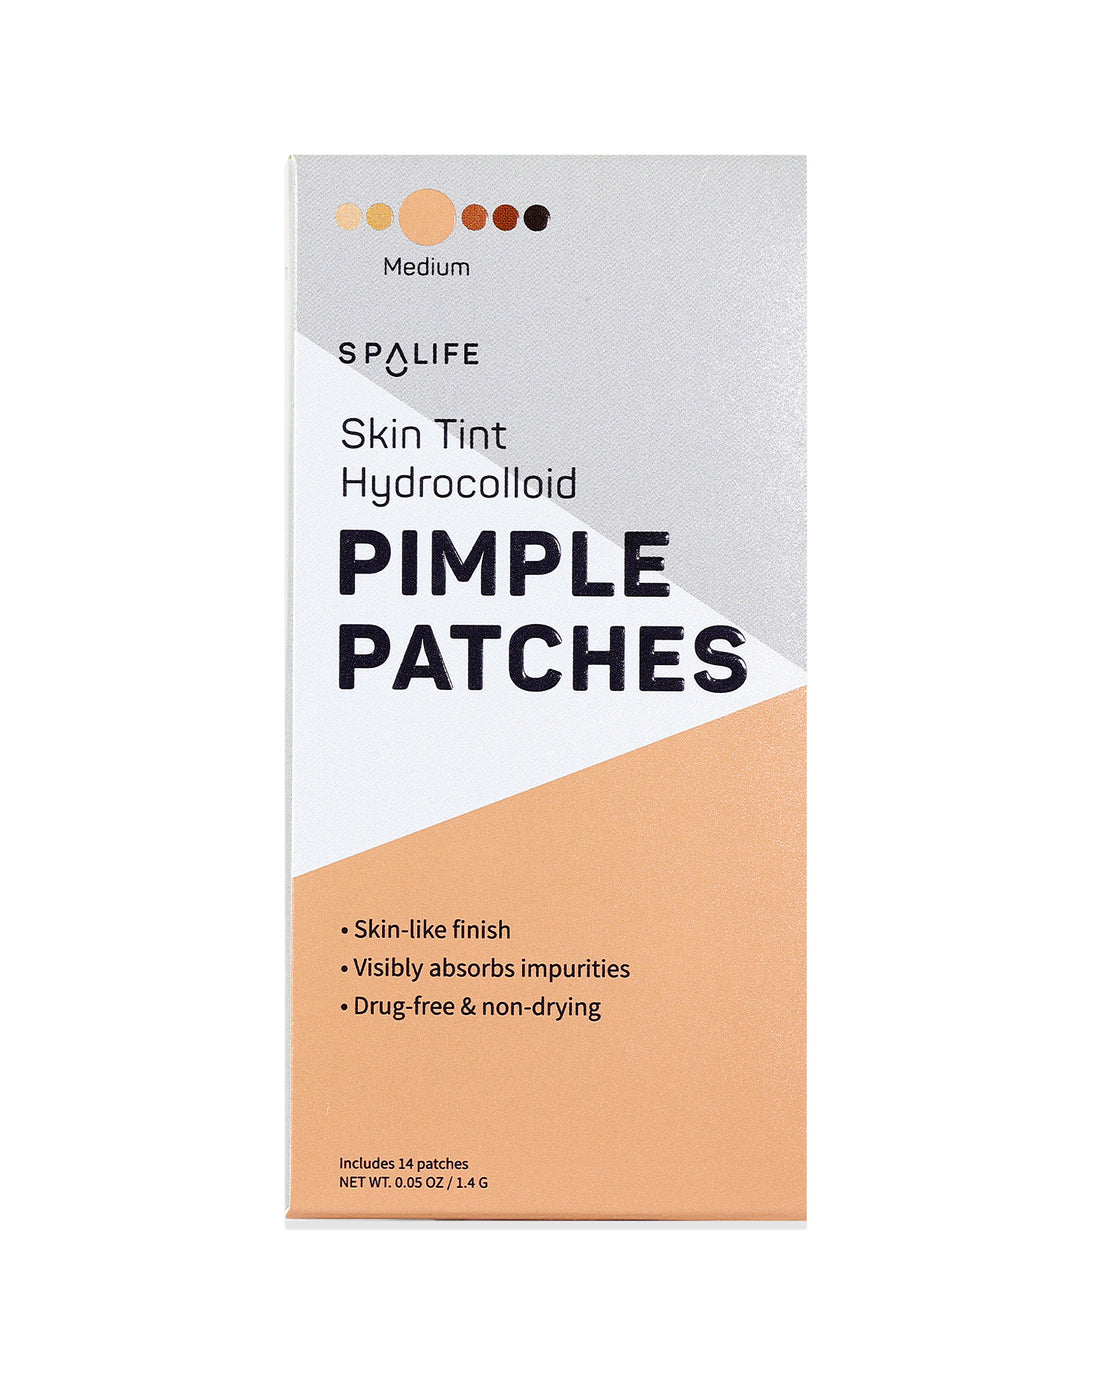 Skin_tint_pimple_patches_packe-510